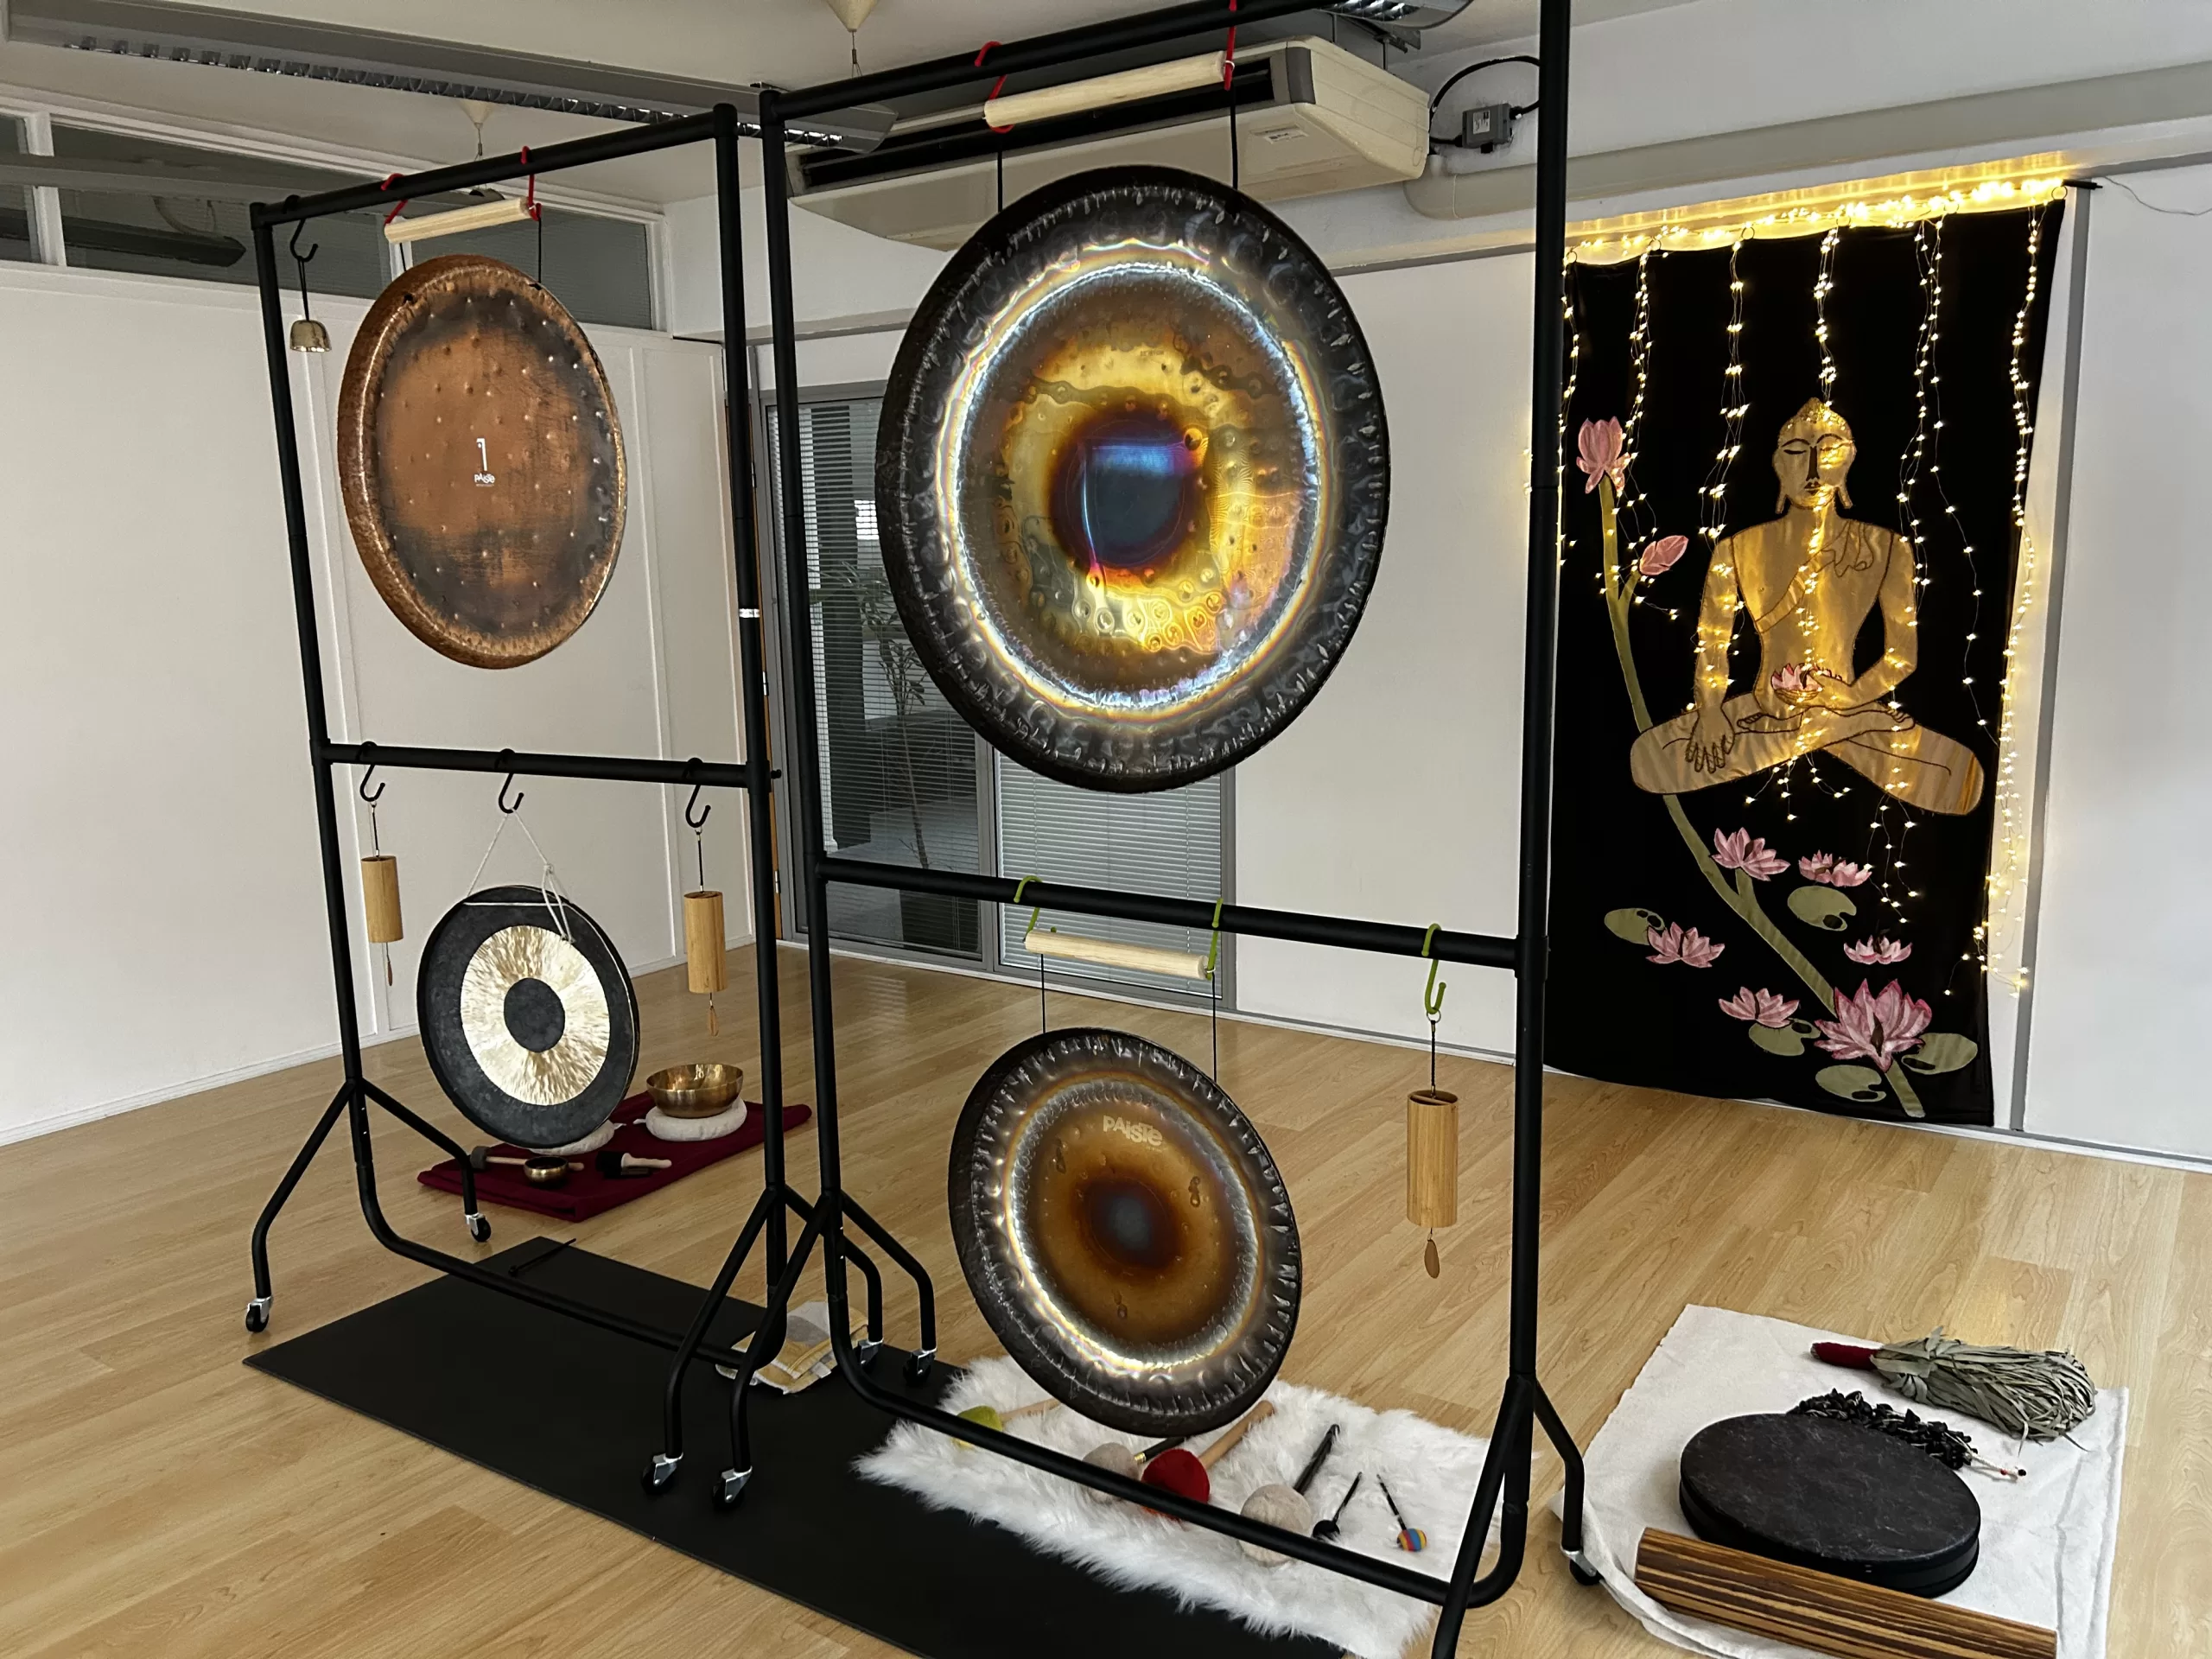 gongs ready to play at a gong bath